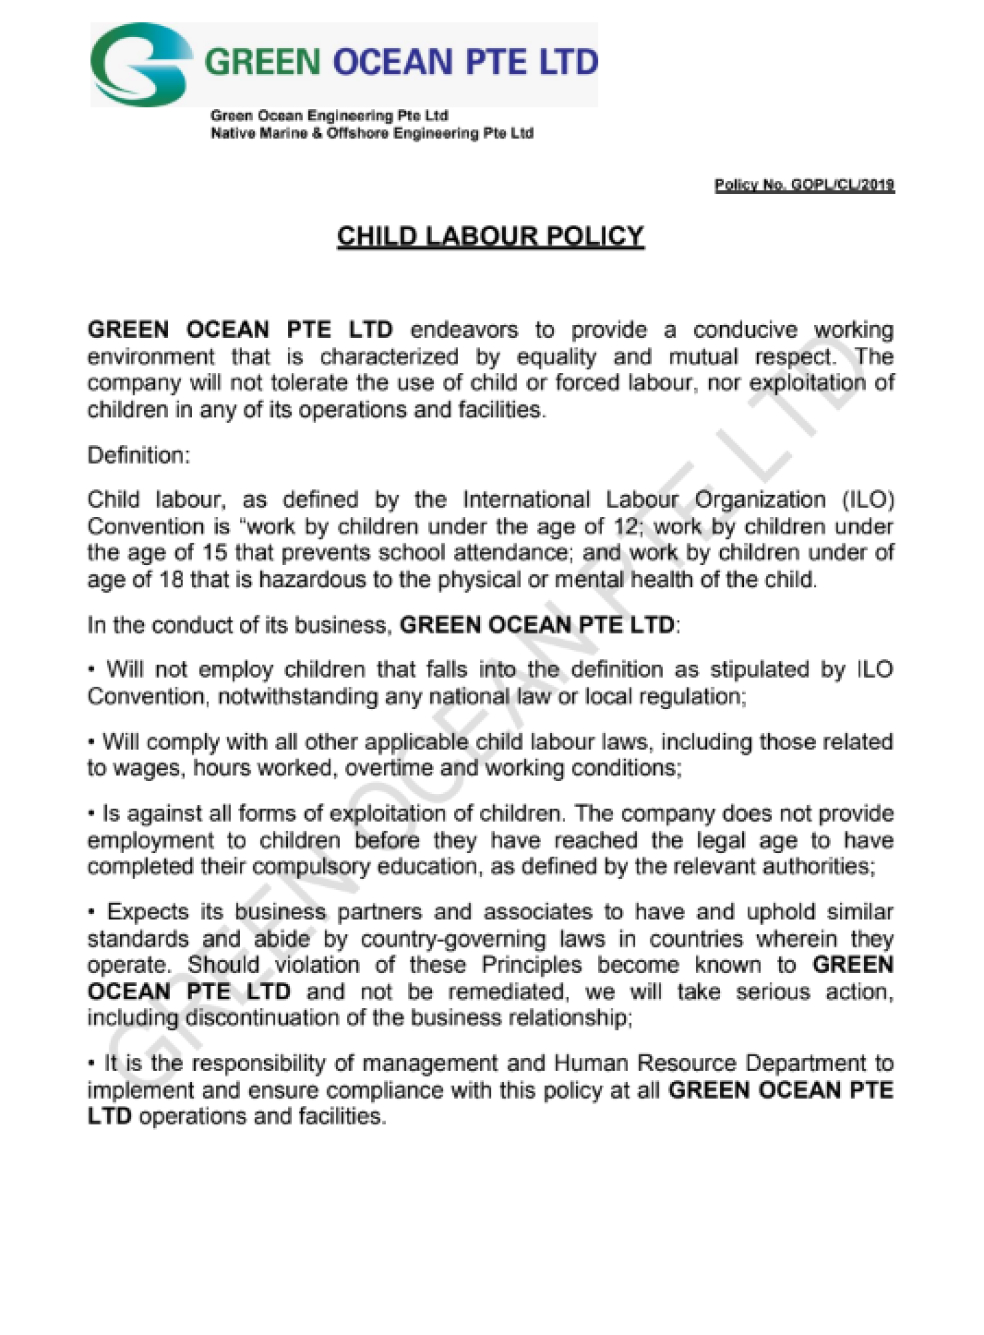 Child Labour Policy